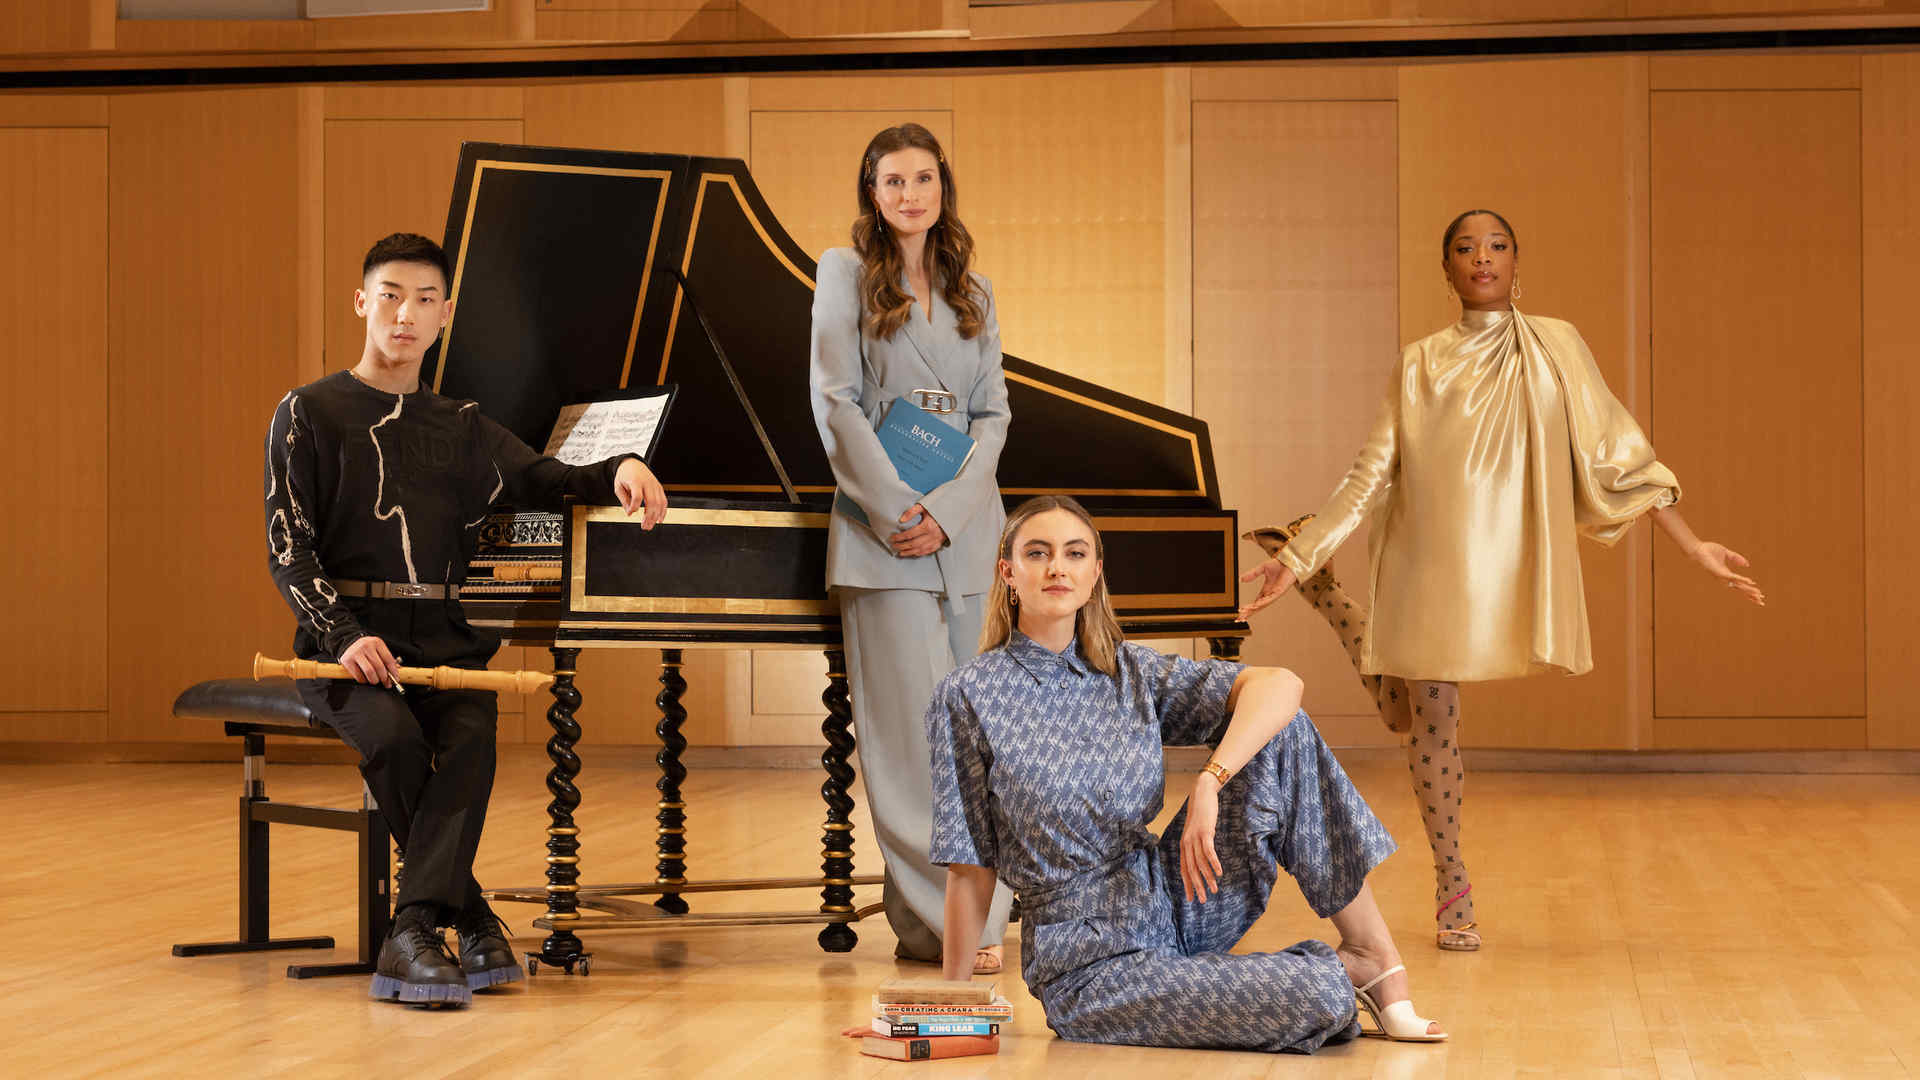 Peter Lim, Mary Beth Nelson, Stella Everett, and Raven Joseph are dressed in high fashion Fendi and pose with books and a harpsichord on stage in a glamor-style shot